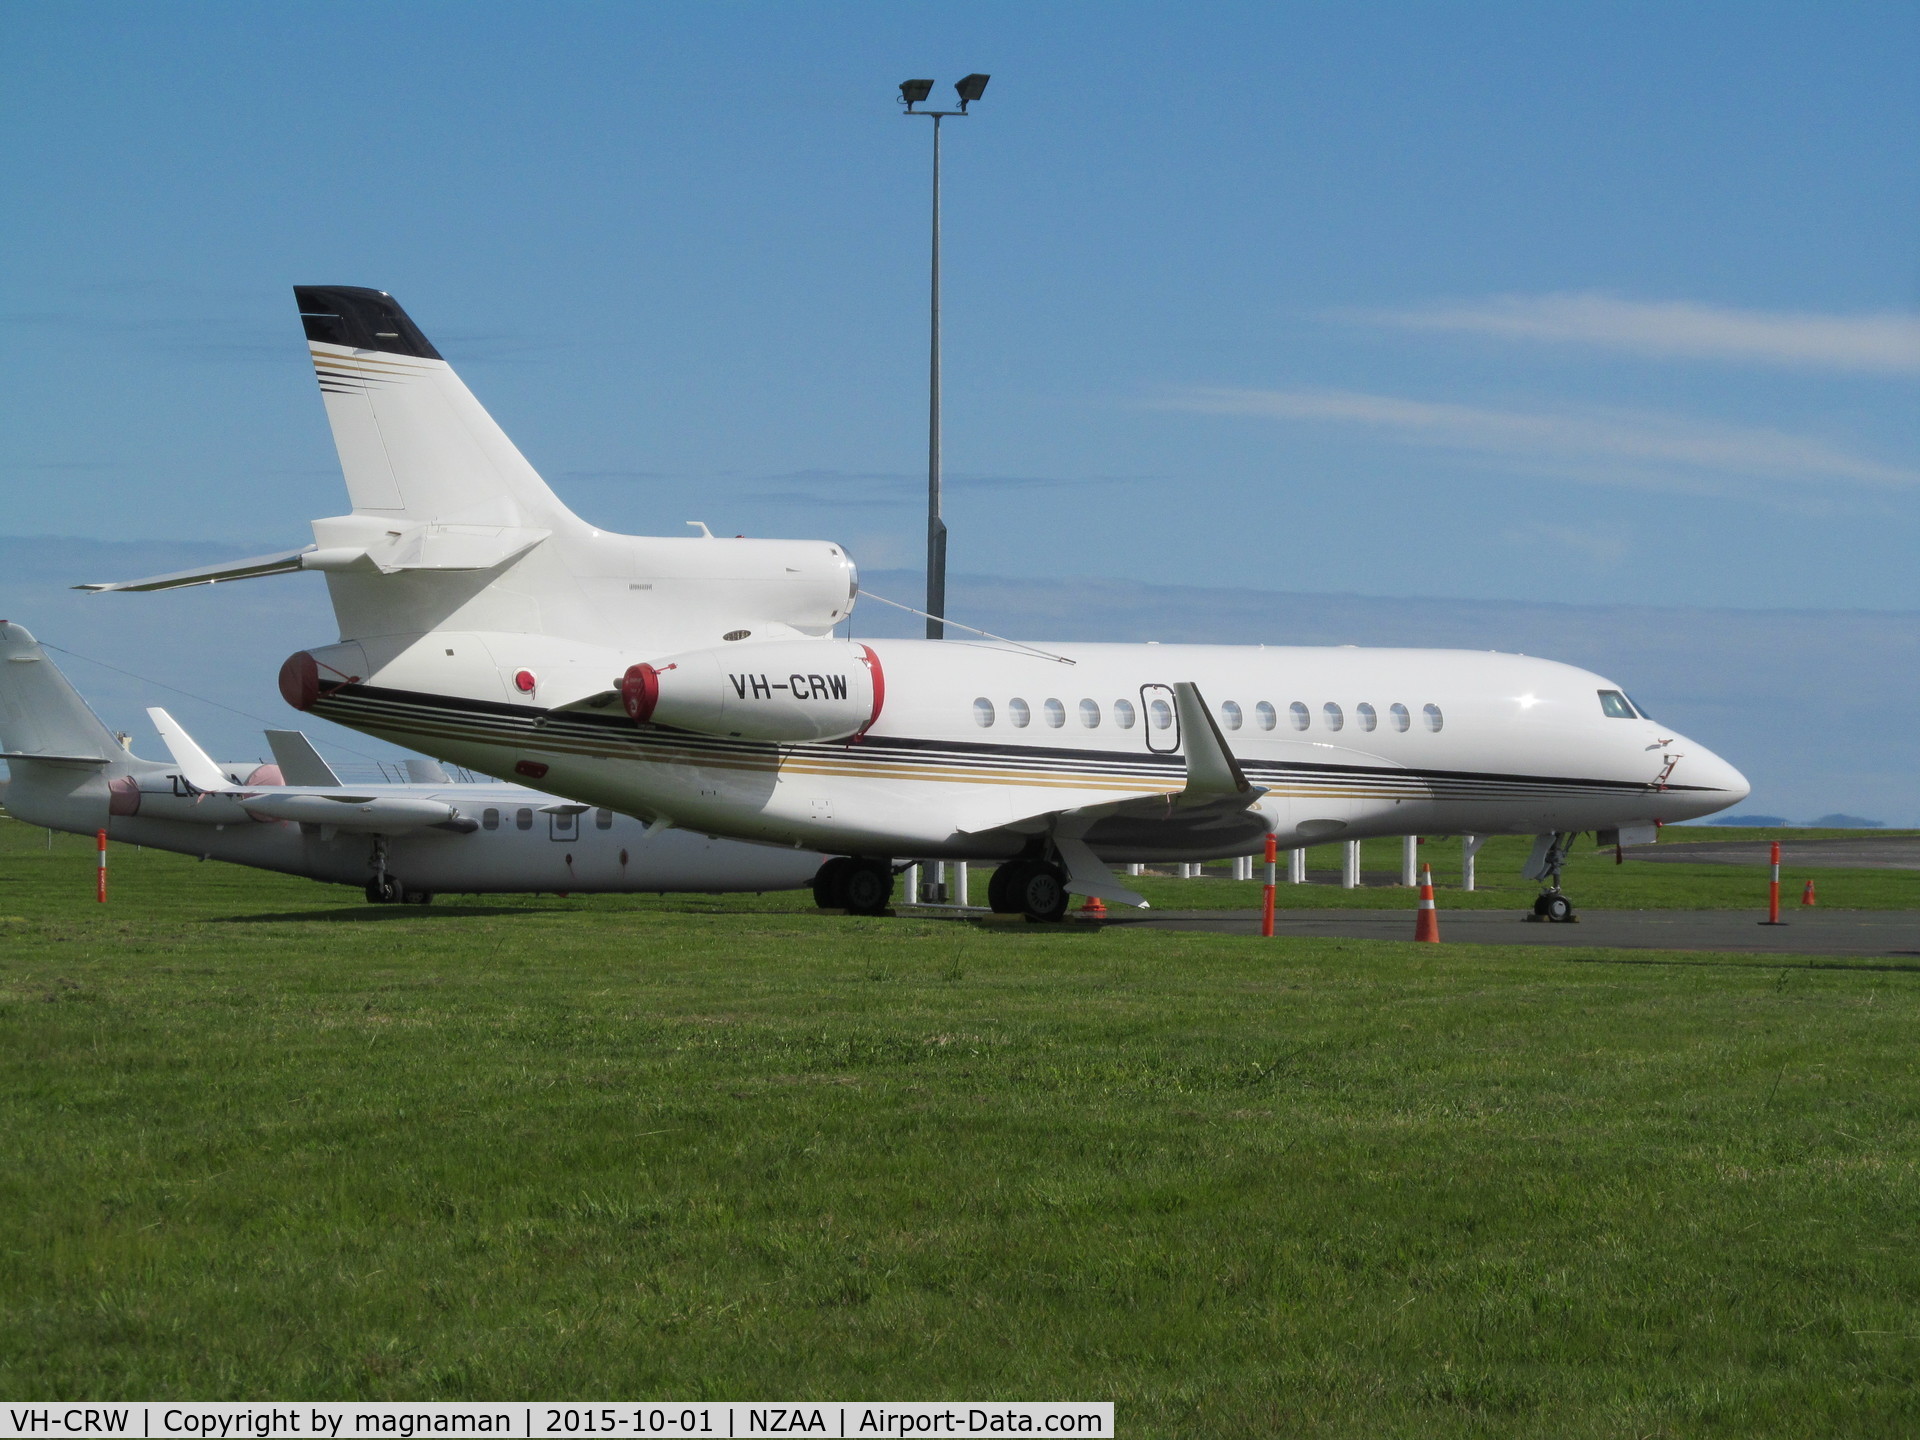 VH-CRW, 2013 Dassault Falcon 7X C/N 217, Up from Napier and then back to Oz